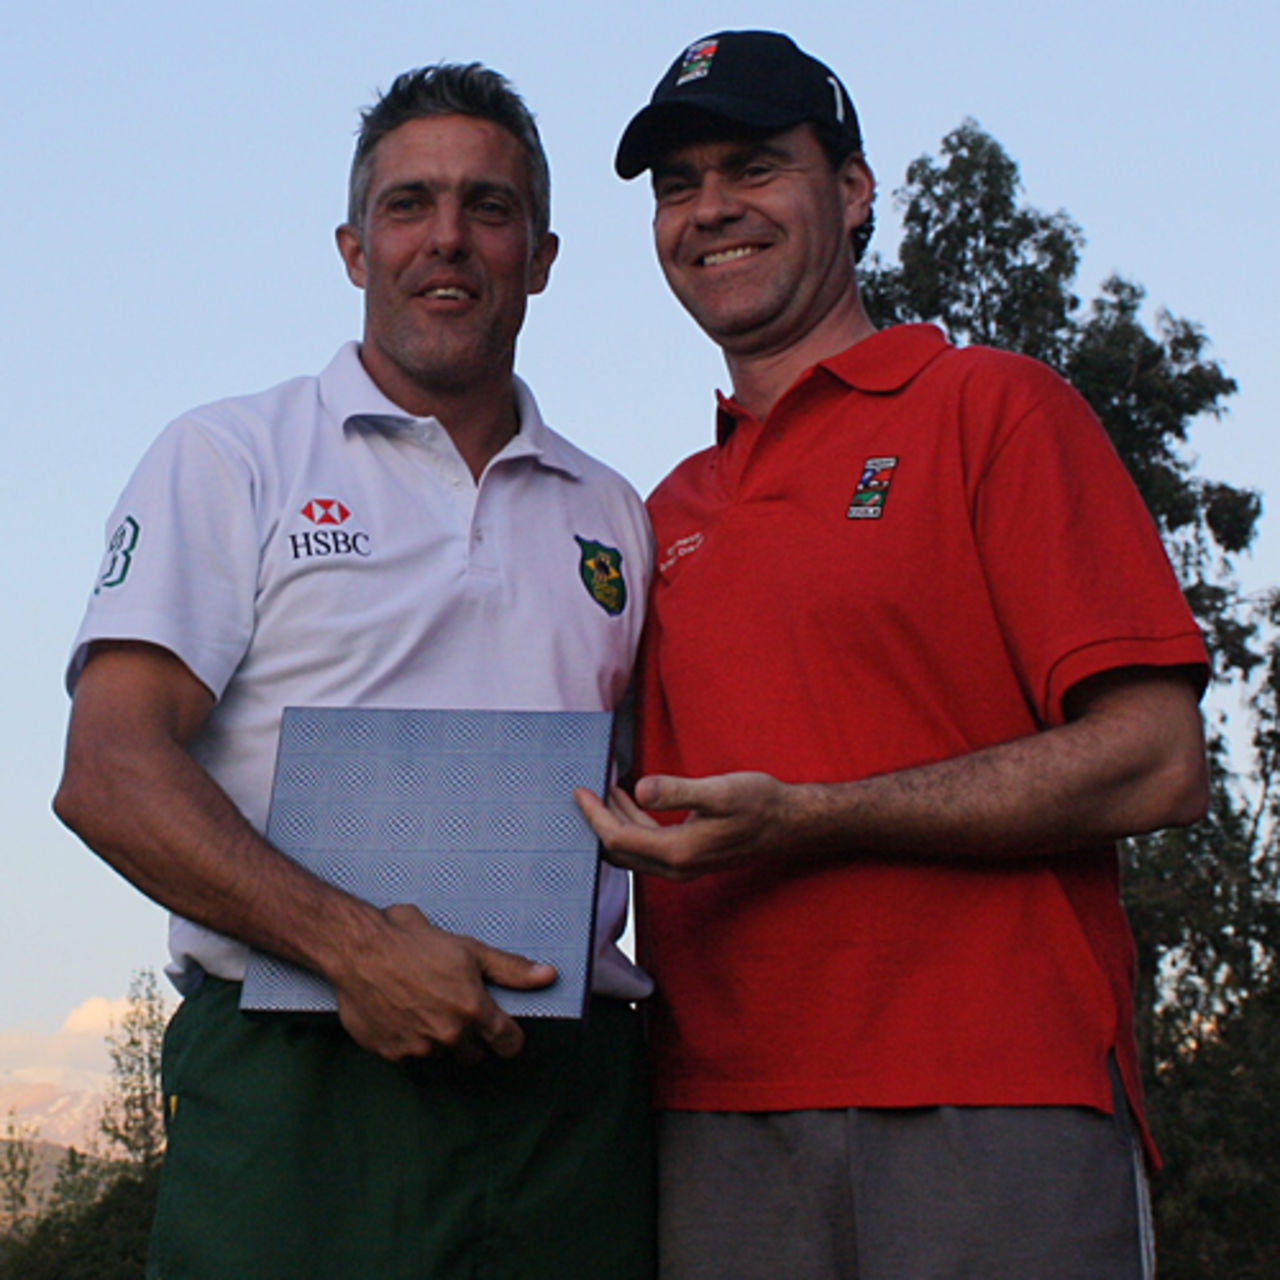 Matthew Featherstone (l) is named Most Valuable Player of the tournament, WCL Americas Division 3 tournament, Santiago, October 13, 2009